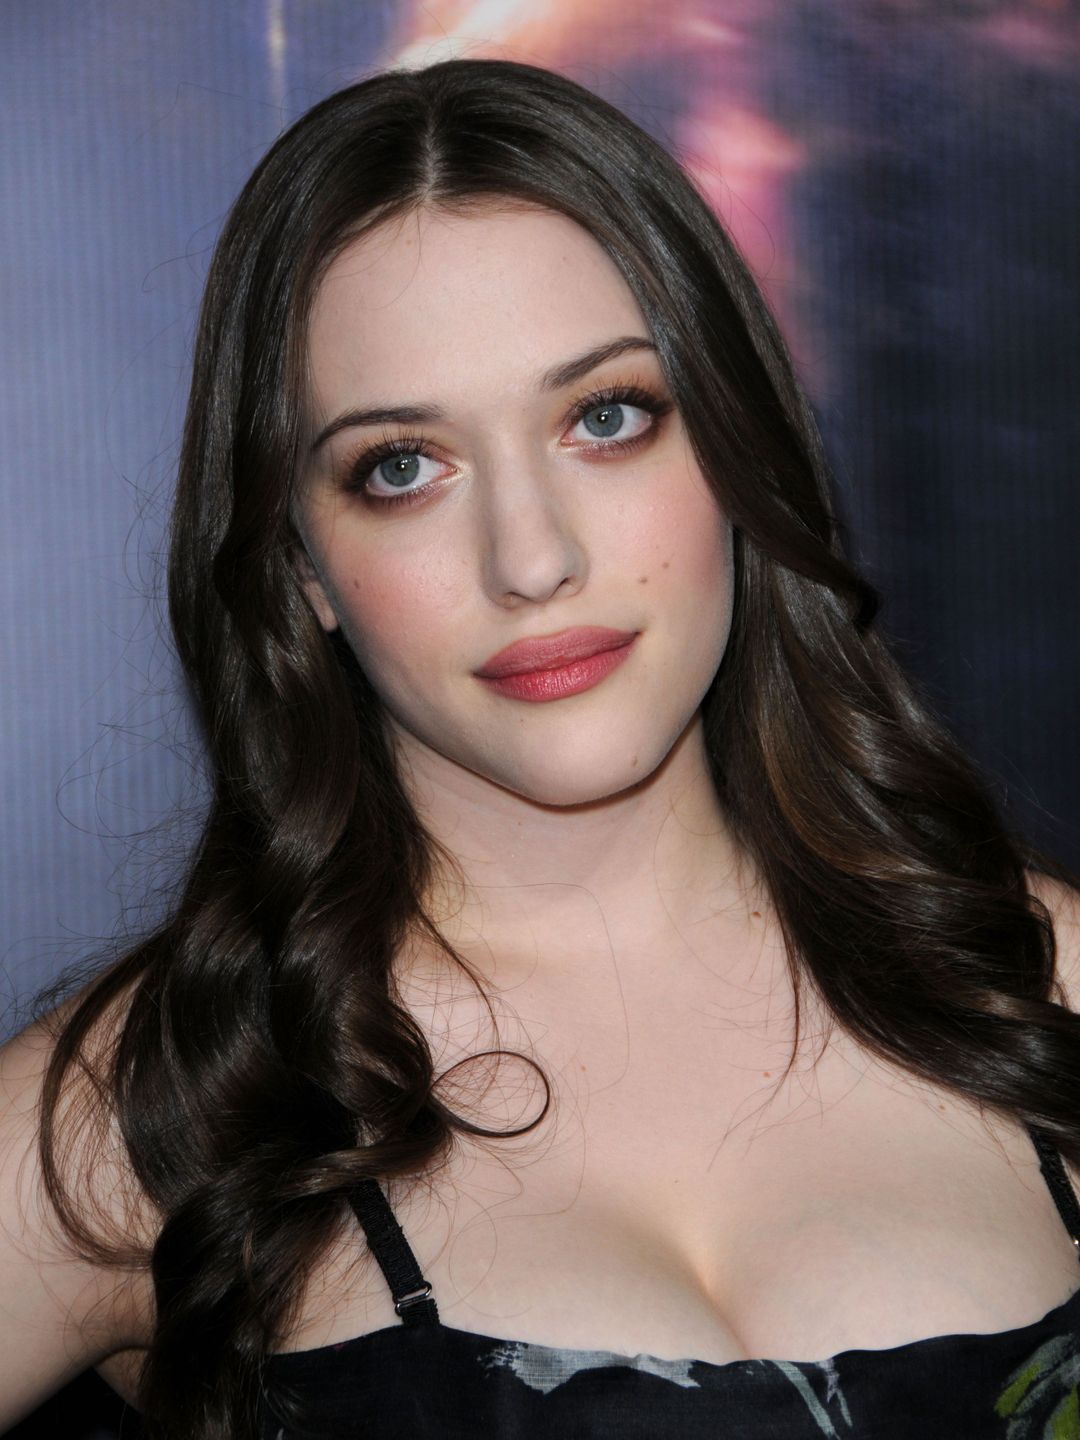 Kat Dennings unphotoshopped pictures